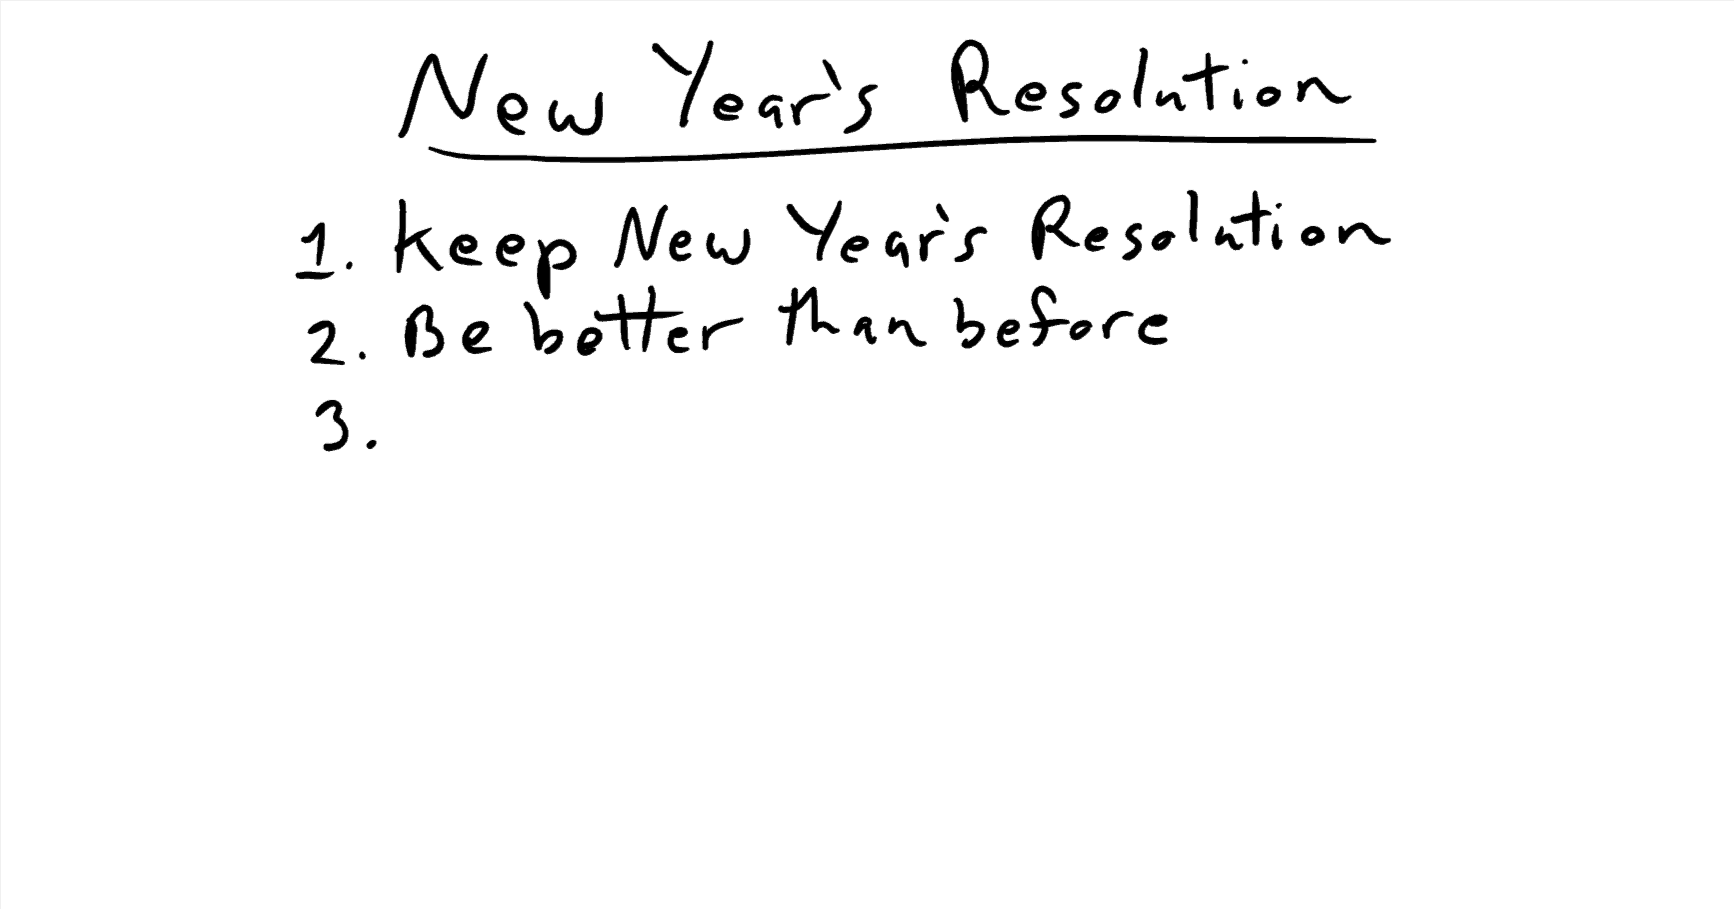 New Year’s Resolution